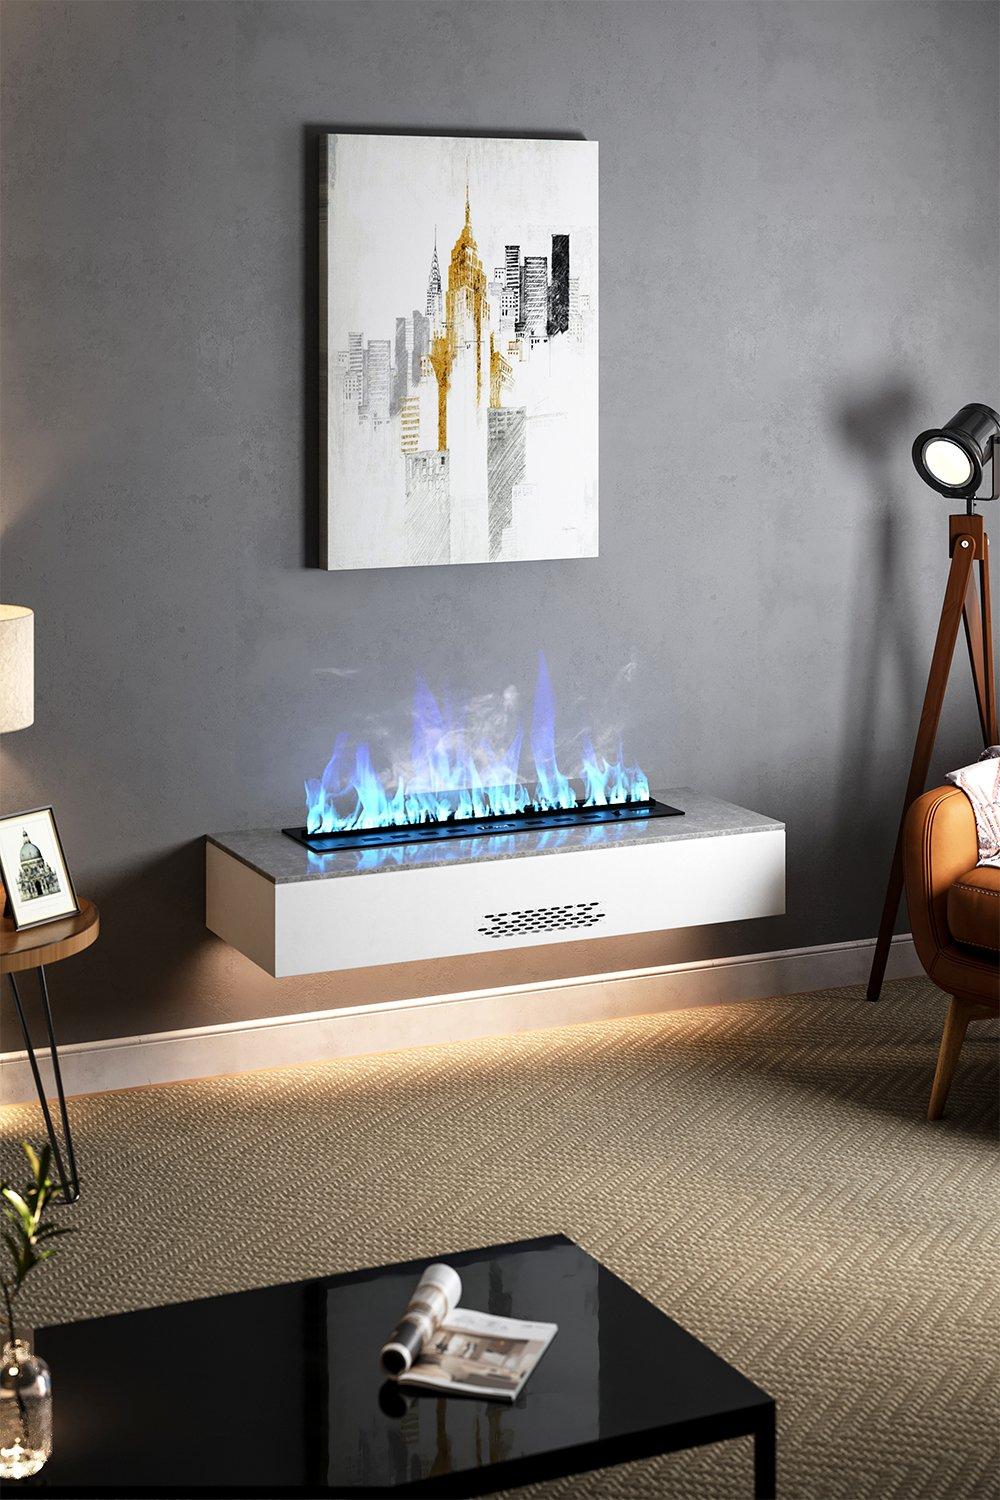 Electric 3D Water Vapour Fireplace with 7 Adjustable Flames